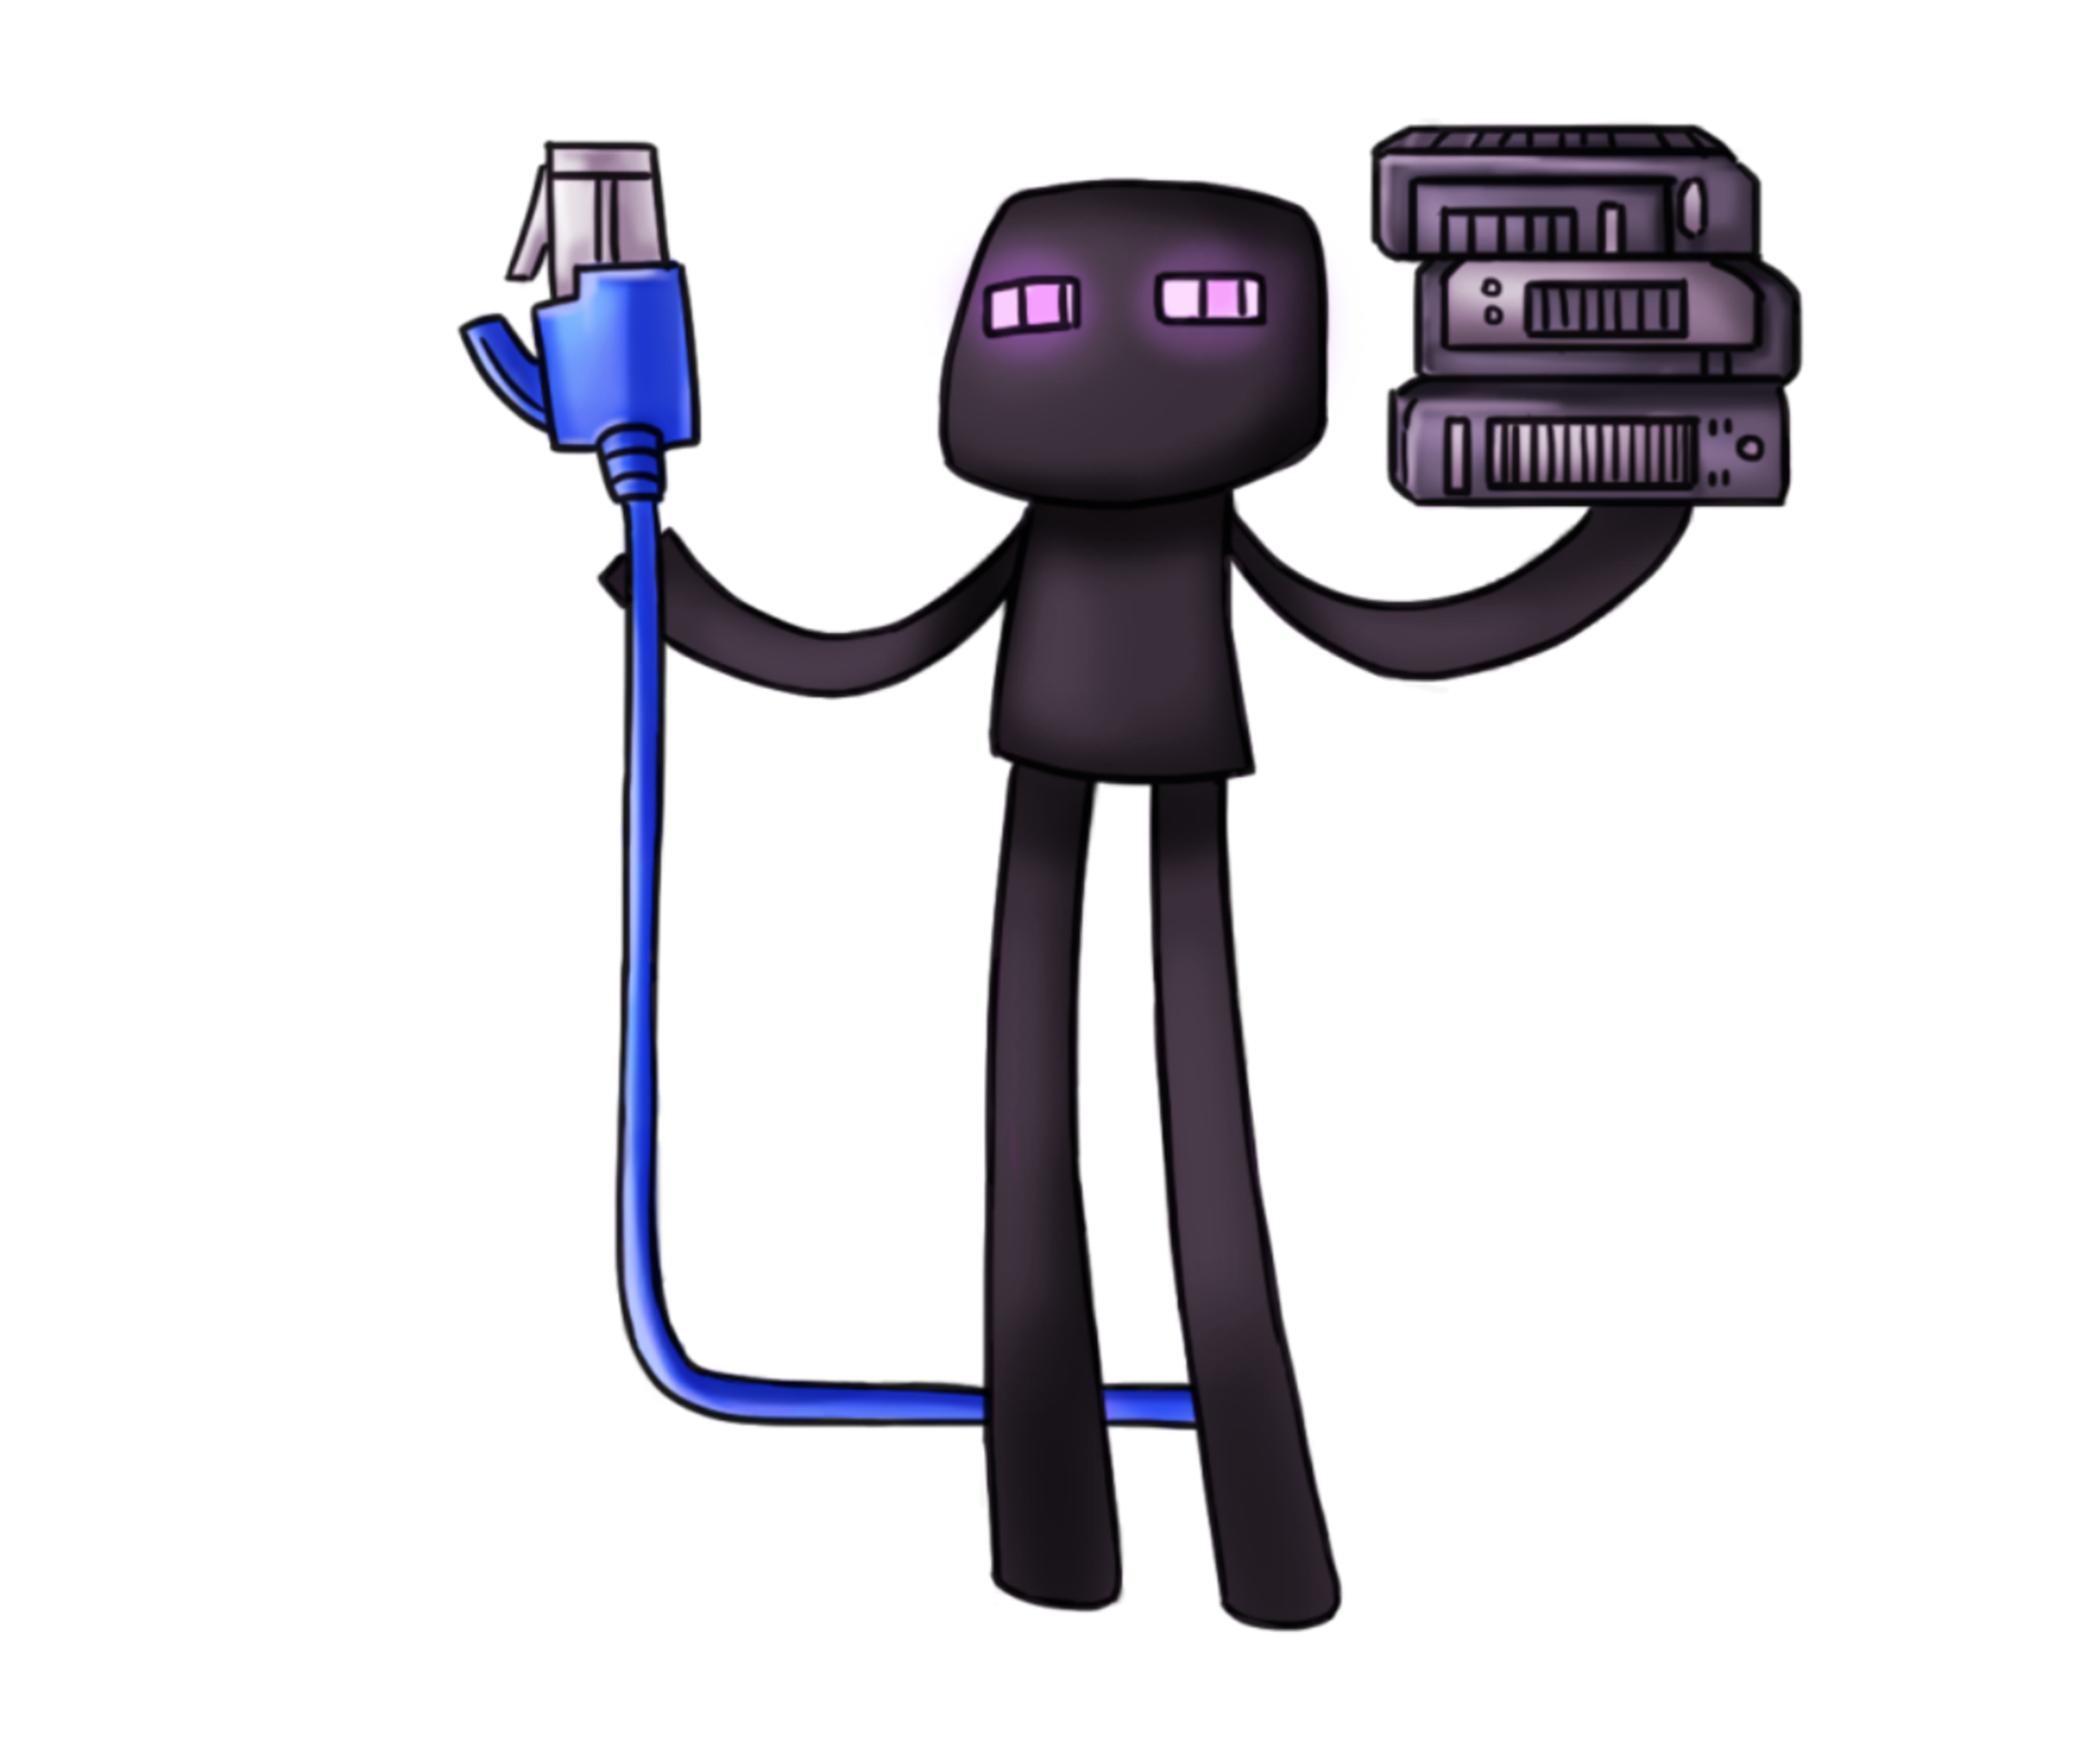 Enderman holding an ethernet cable